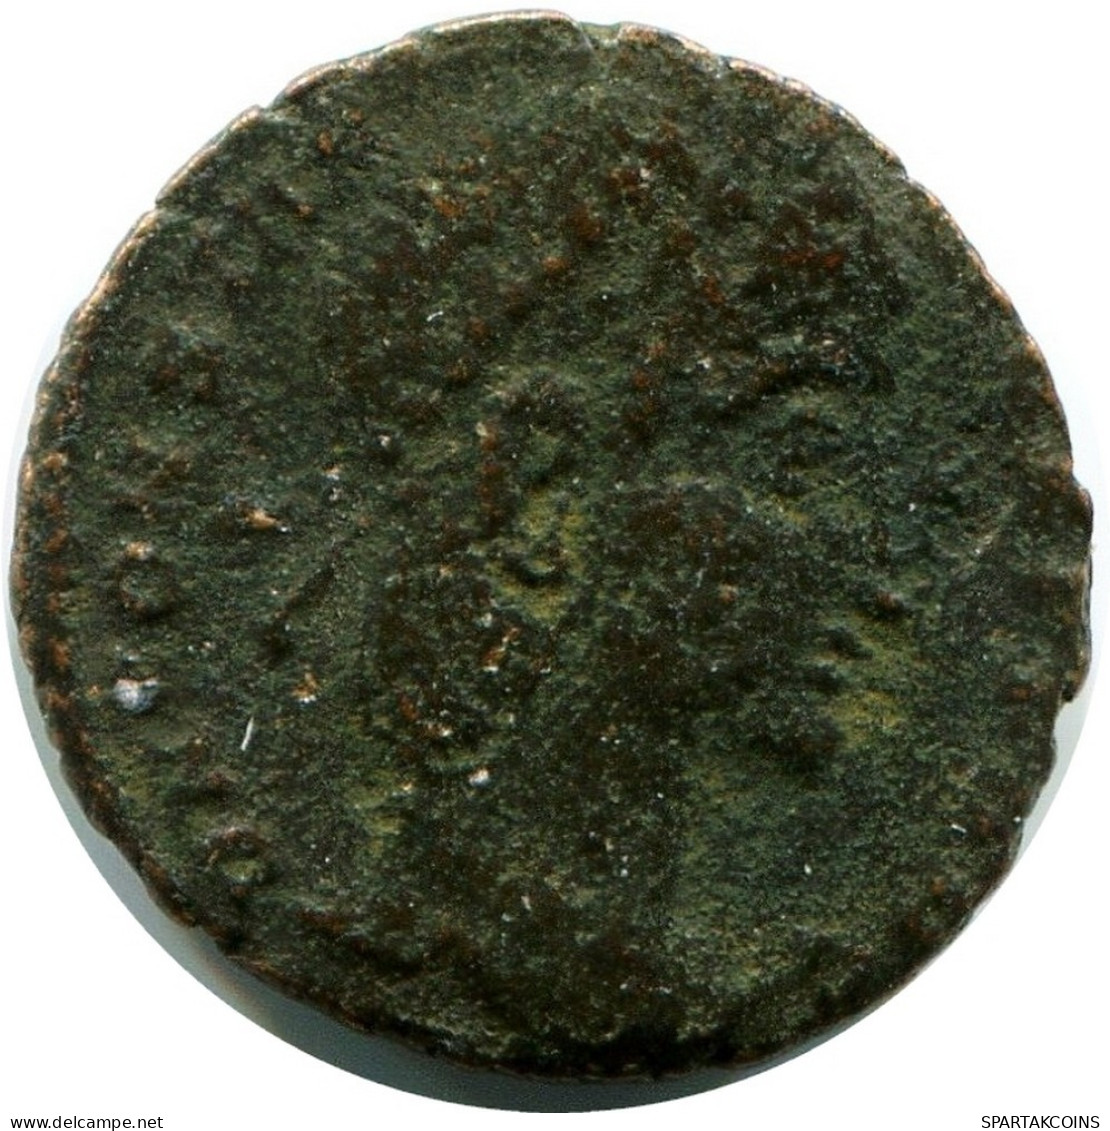 ROMAN Pièce MINTED IN ANTIOCH FOUND IN IHNASYAH HOARD EGYPT #ANC11314.14.F.A - El Imperio Christiano (307 / 363)